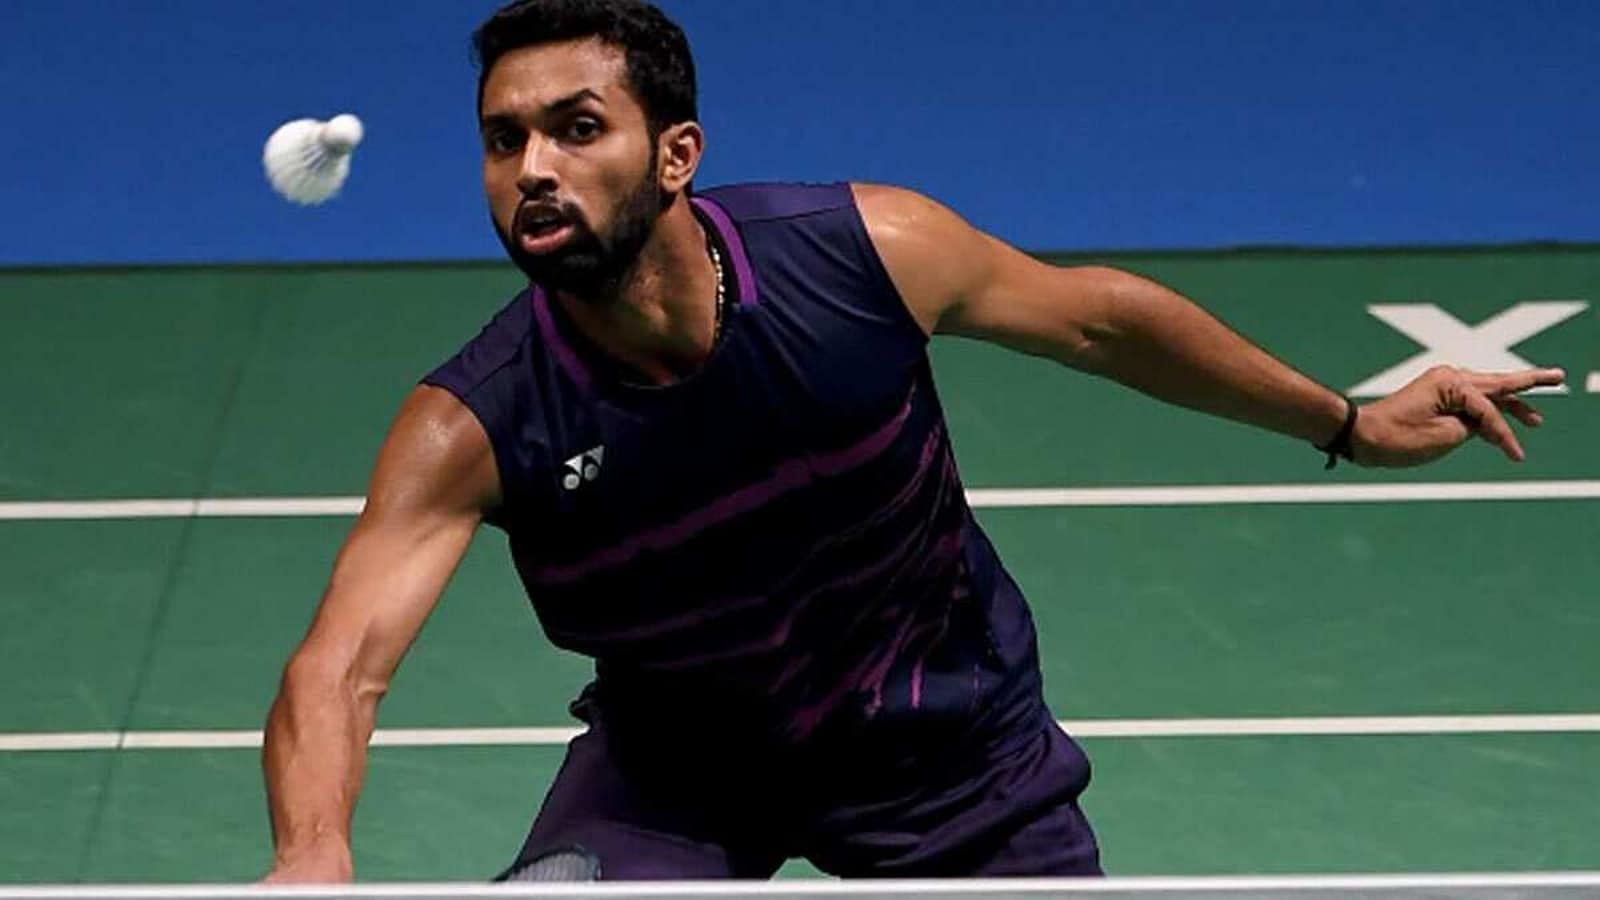 HS Prannoy books semifinals berth at the India Open 